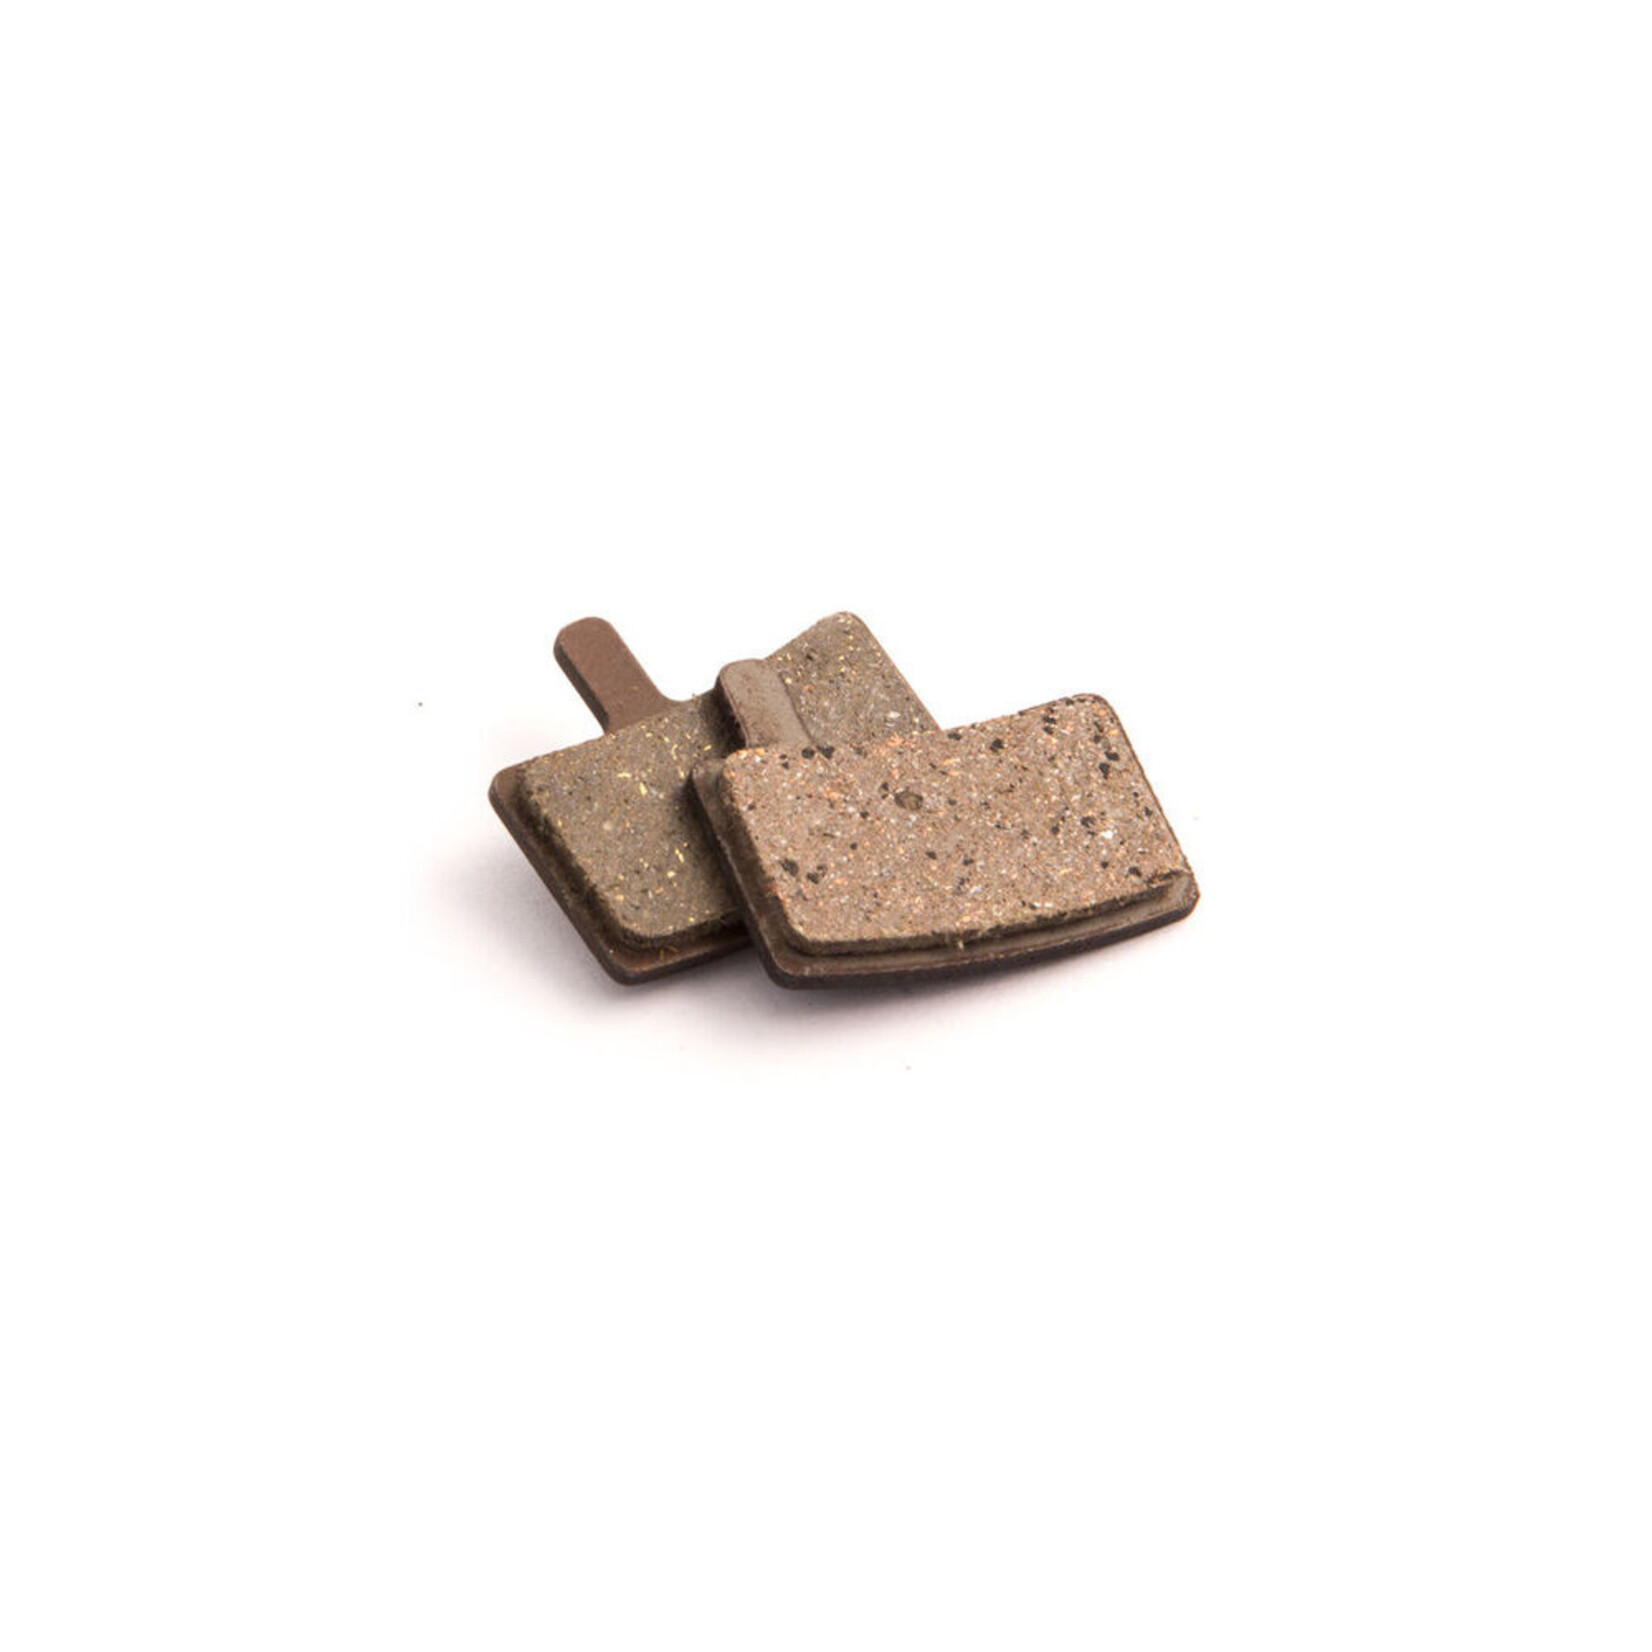 CLARKS CLARKS ORGANIC DISC BRAKE PADS FOR HAYES STROKER TRAIL